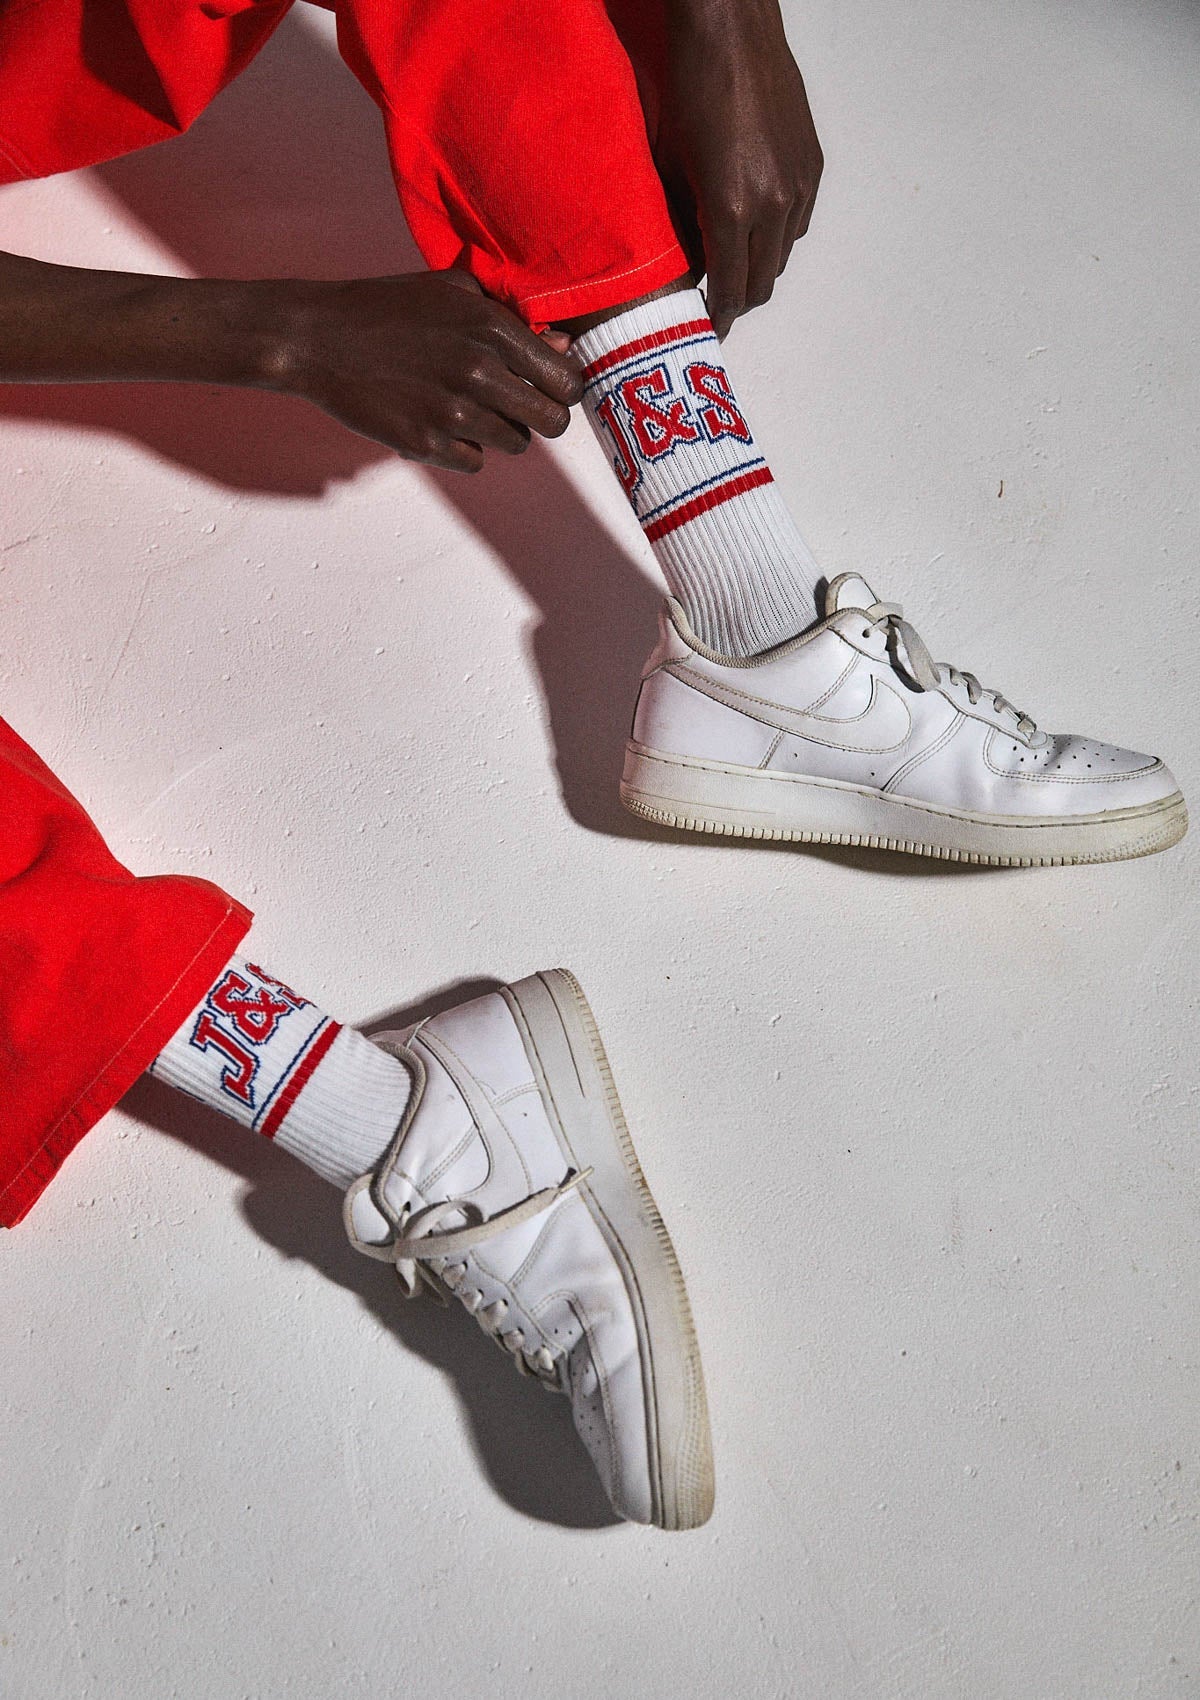 Double Play Socks - White/Red